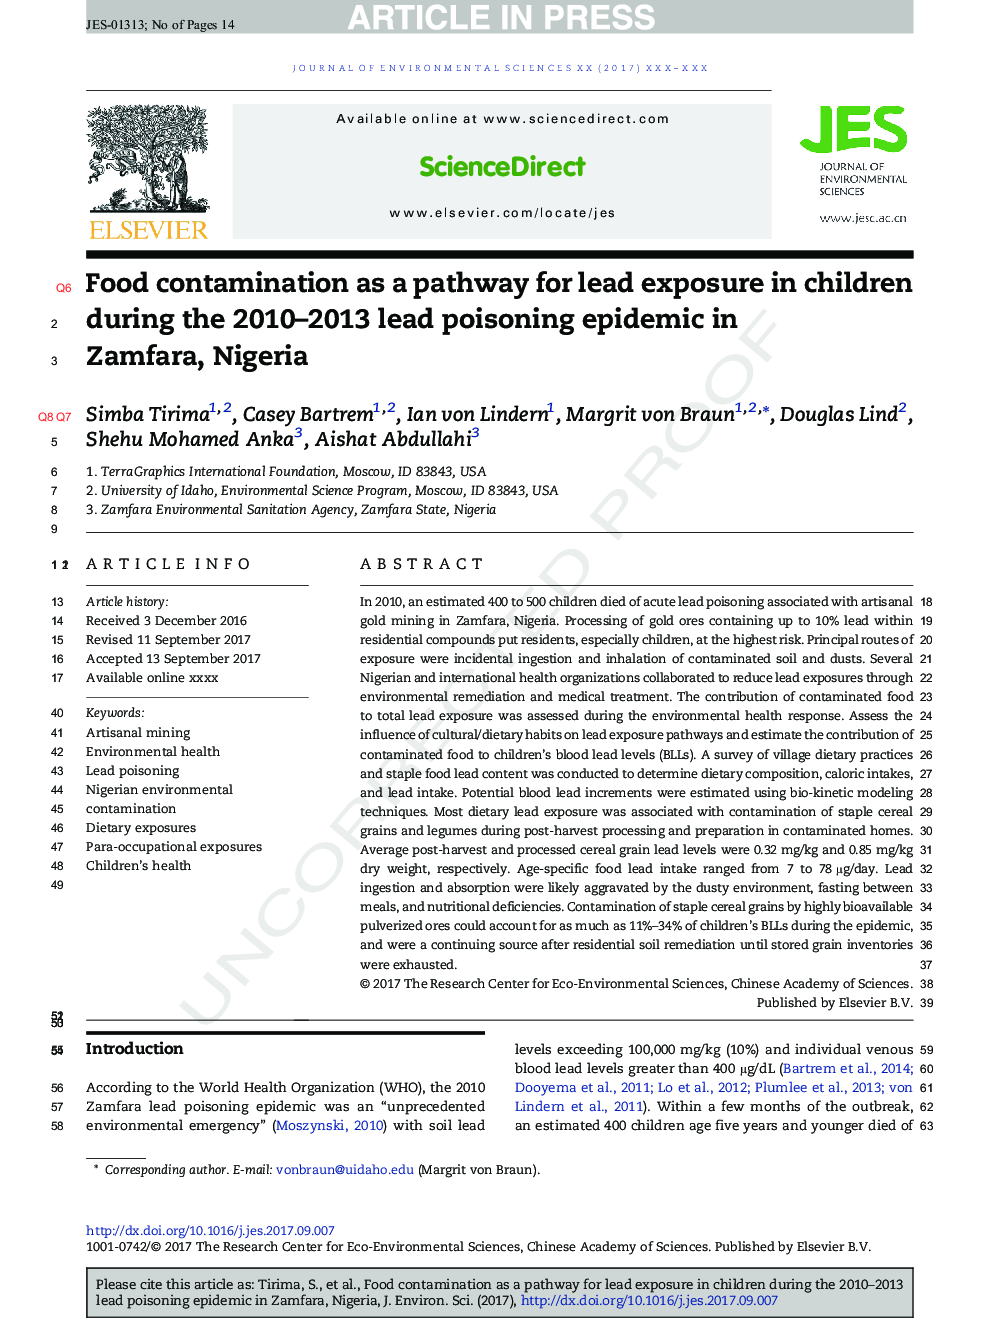 Food contamination as a pathway for lead exposure in children during the 2010-2013 lead poisoning epidemic in Zamfara, Nigeria